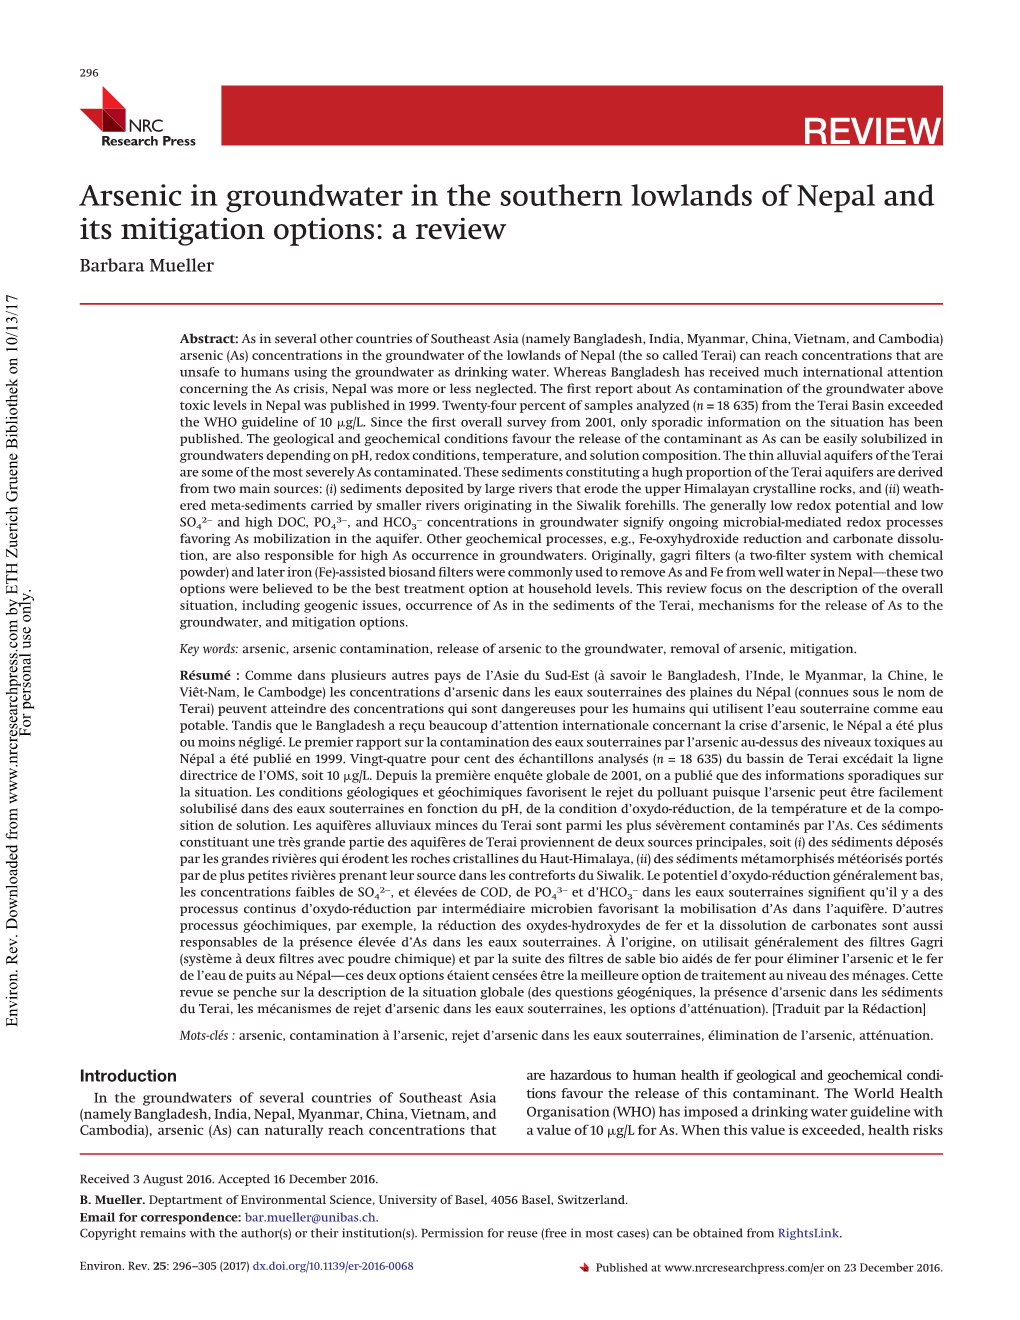 Arsenic in Groundwater in the Southern Lowlands of Nepal and Its Mitigation Options: a Review Barbara Mueller